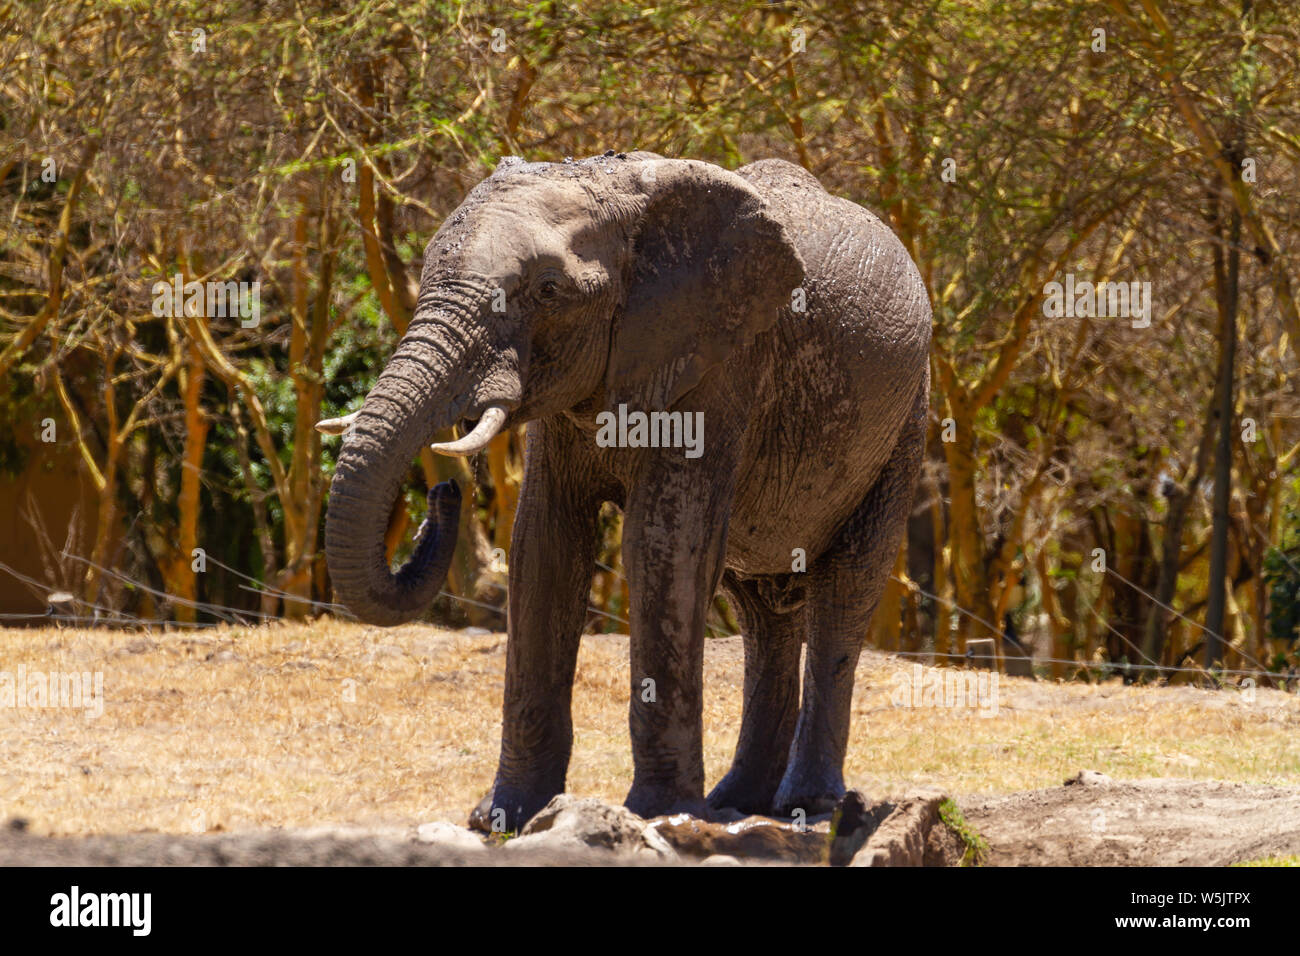 Elephant, Loxodonta Africana, wet drinking dripping water from waterhole at Serena Sweetwaters tented camp, Ol Pejeta Conservancy, Kenya, Africa Stock Photo